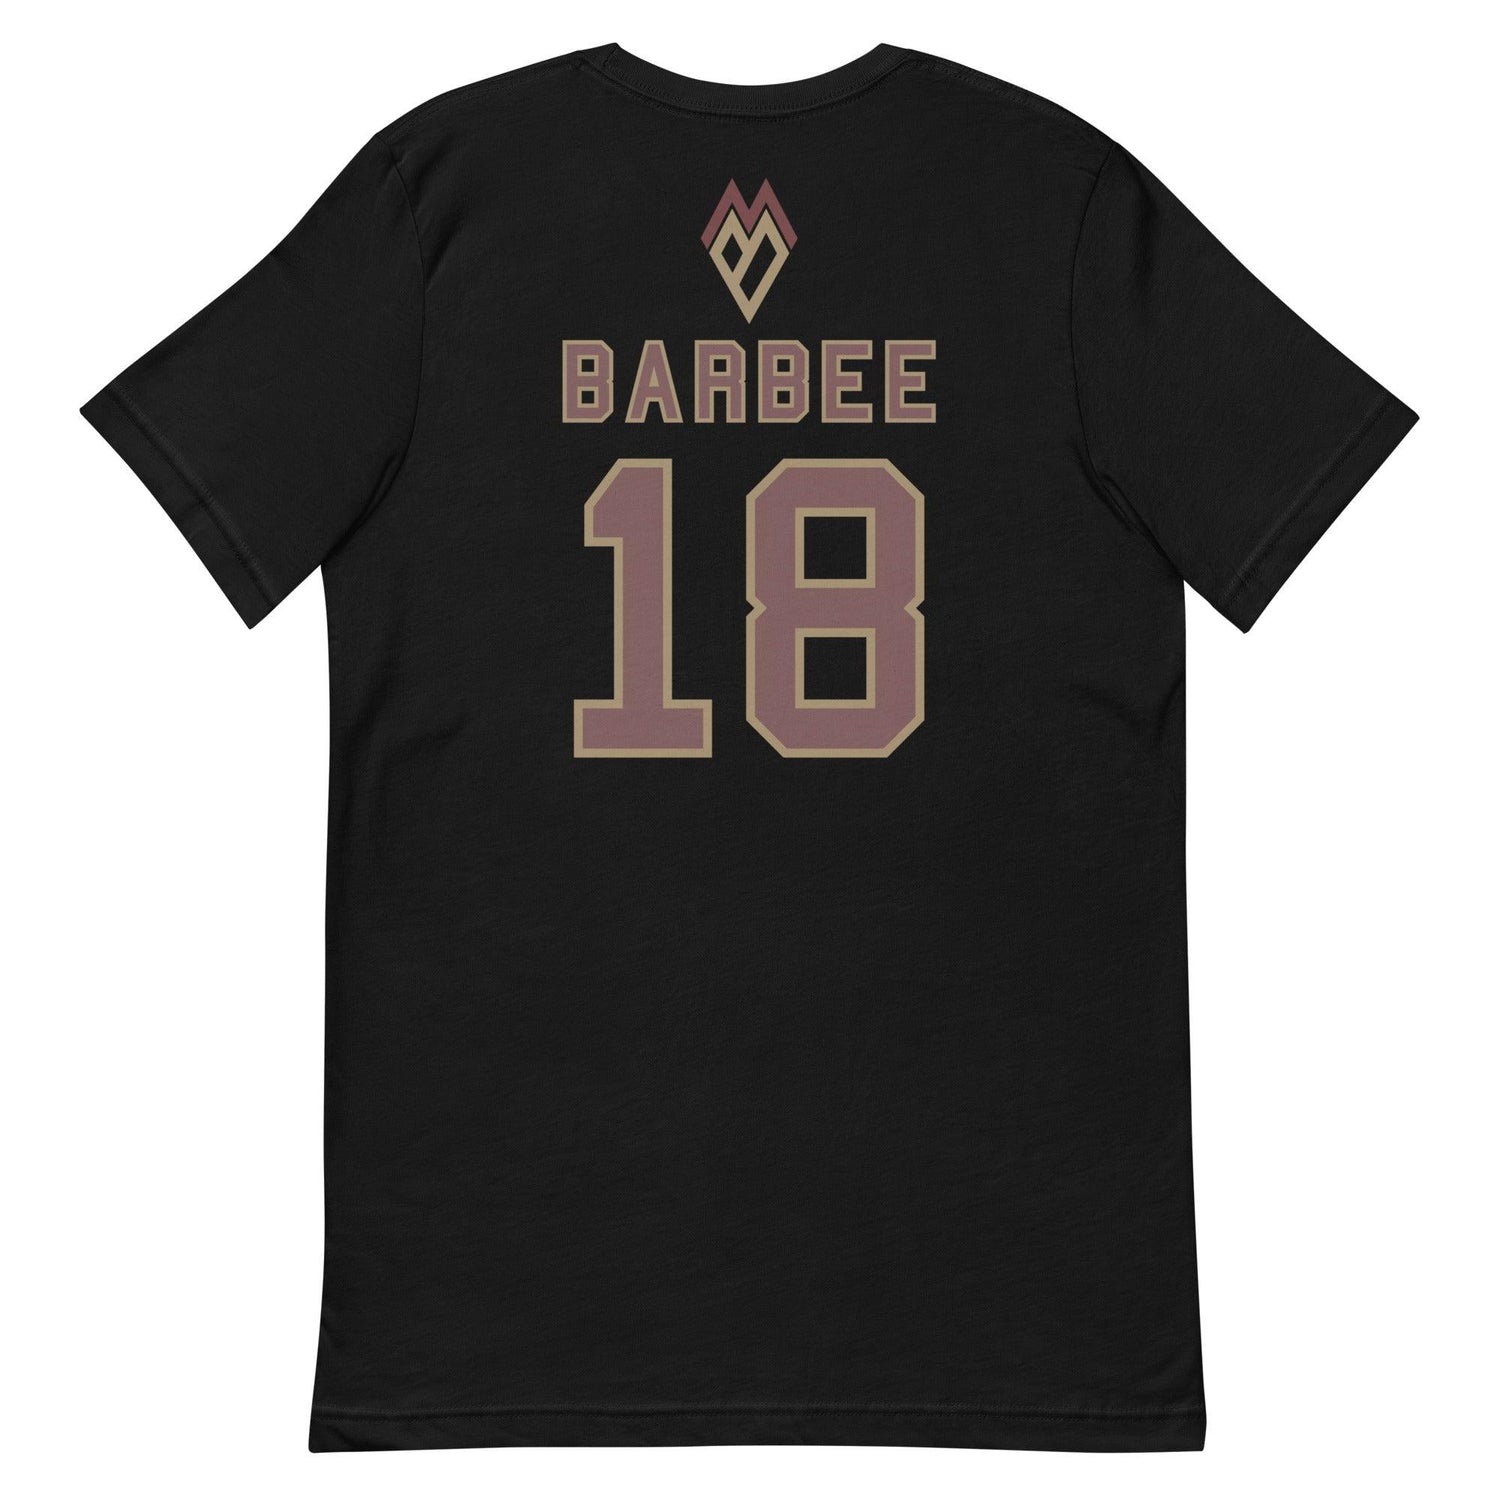 Marcell Barbee "Jersey" t-shirt - Fan Arch